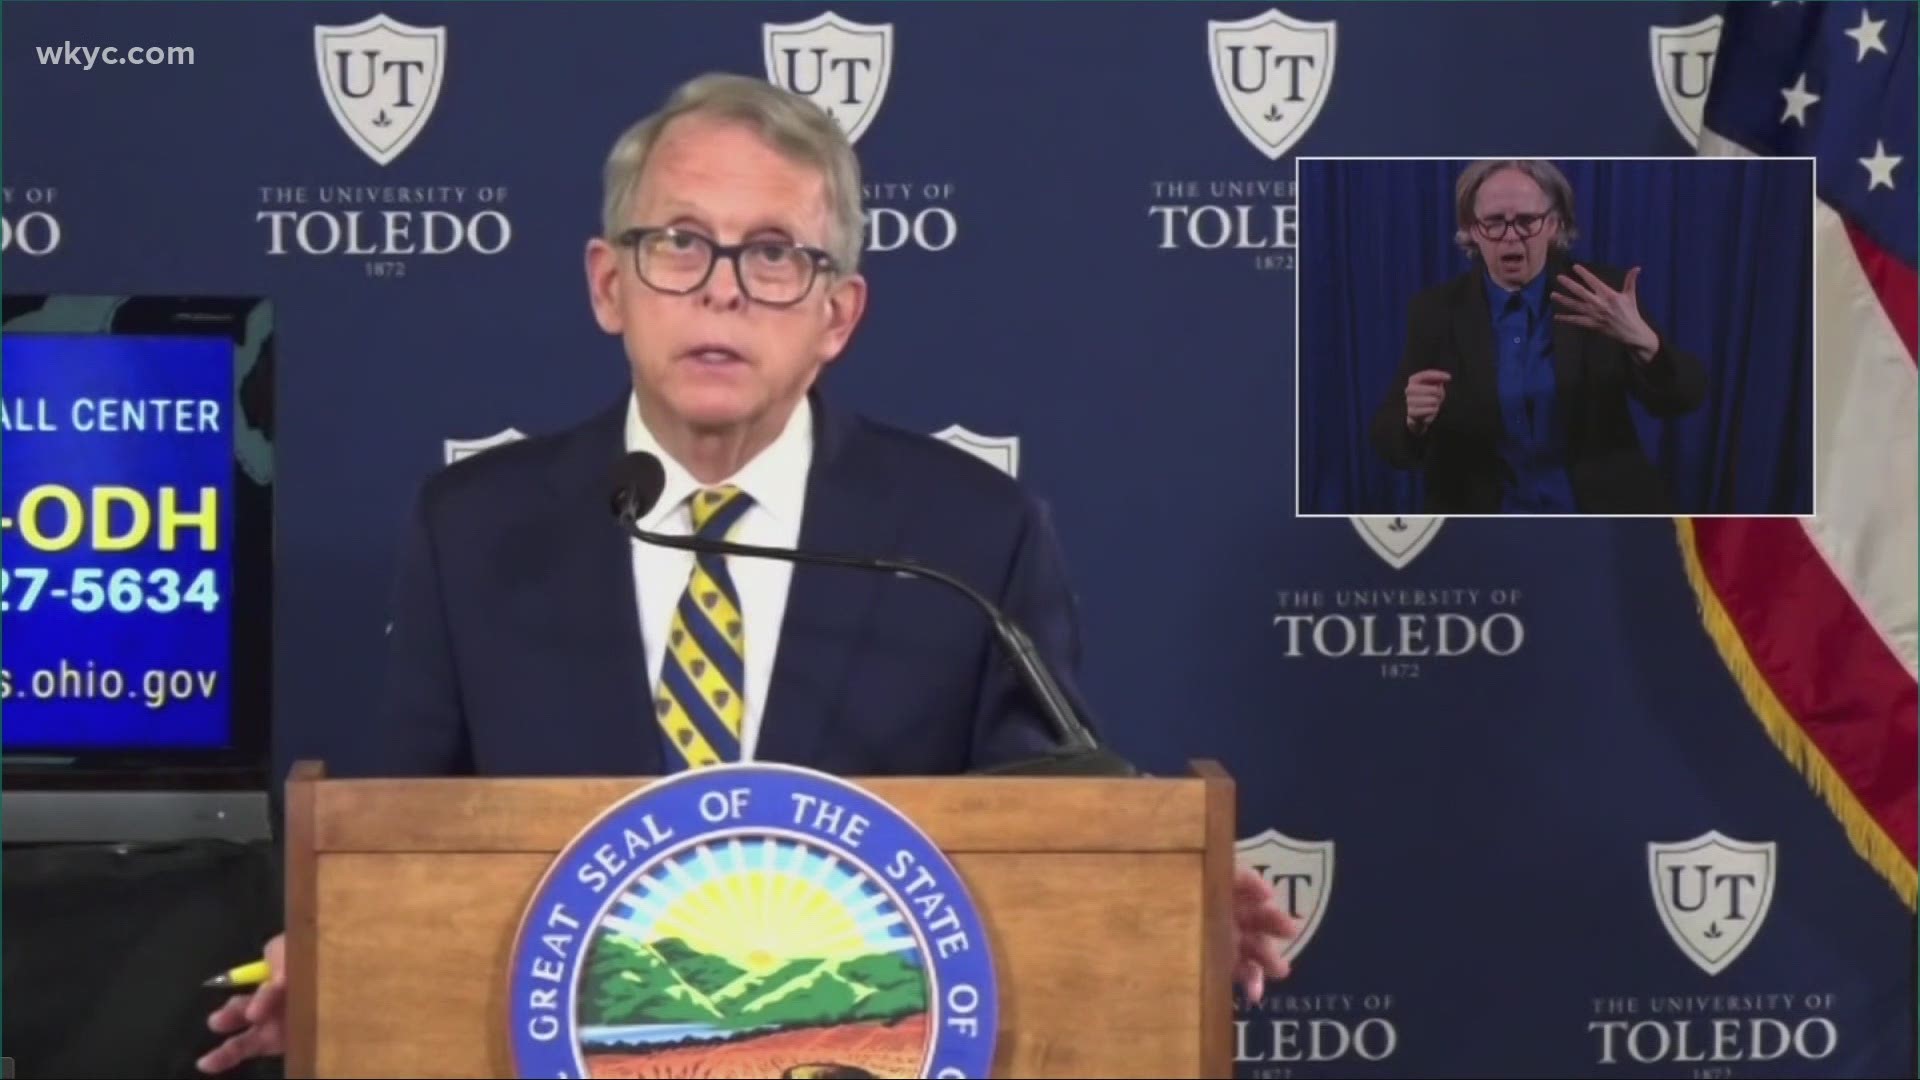 DeWine made the announcement during Thursday's 2 p.m. press conference.